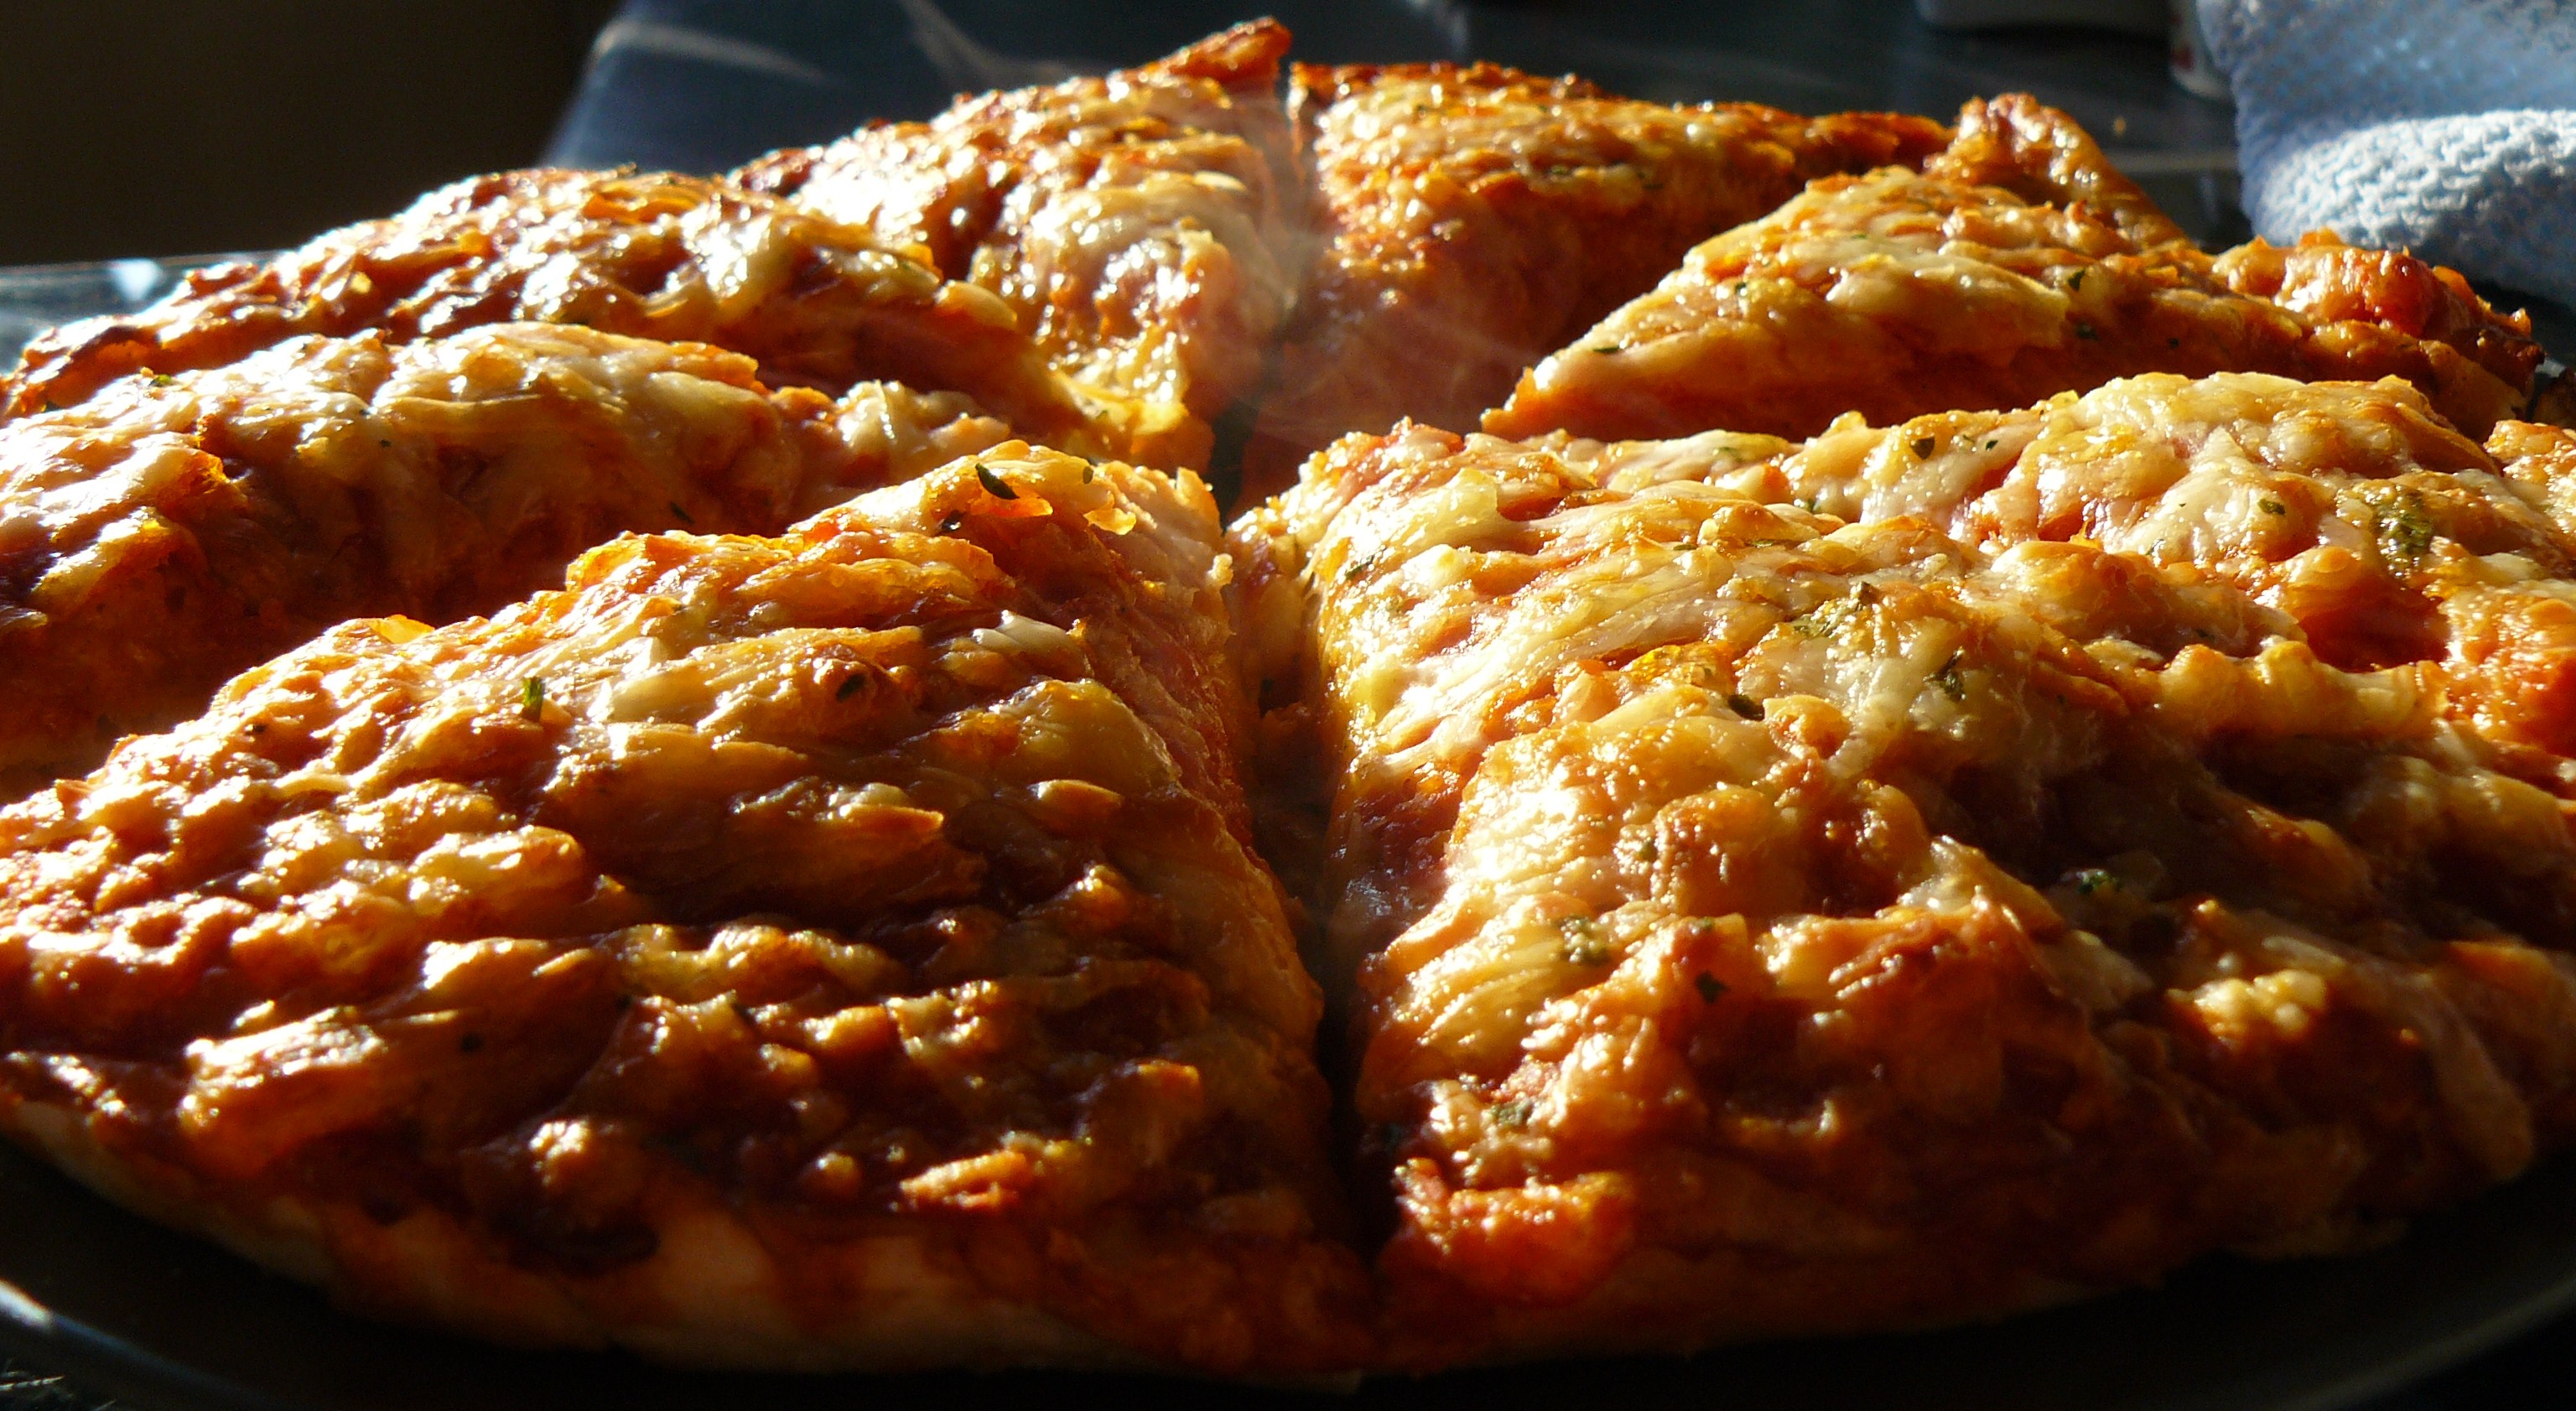 File:CHEESE AND TOMATO PIZZA.JPG - Wikipedia, the free encyclopedia